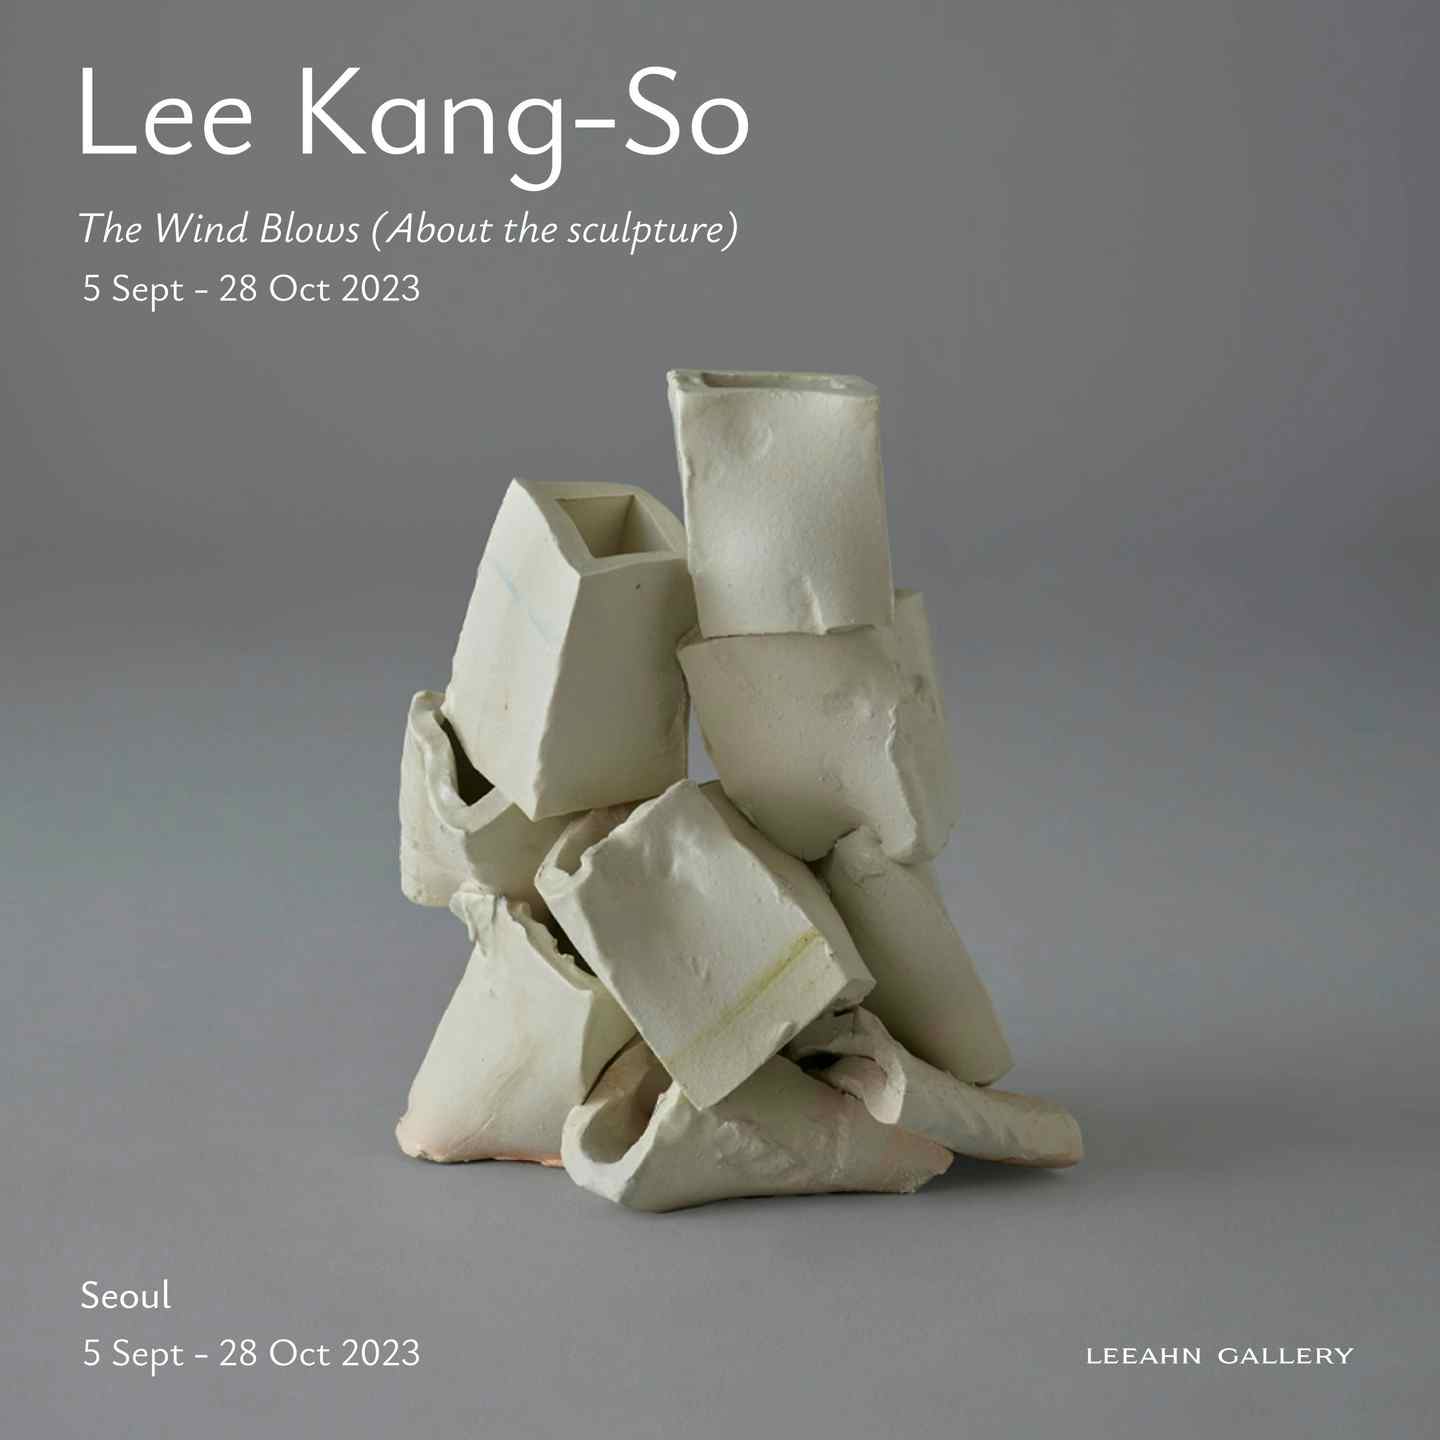 Lee Kang-So: The Wind Blows (About the sculpture)